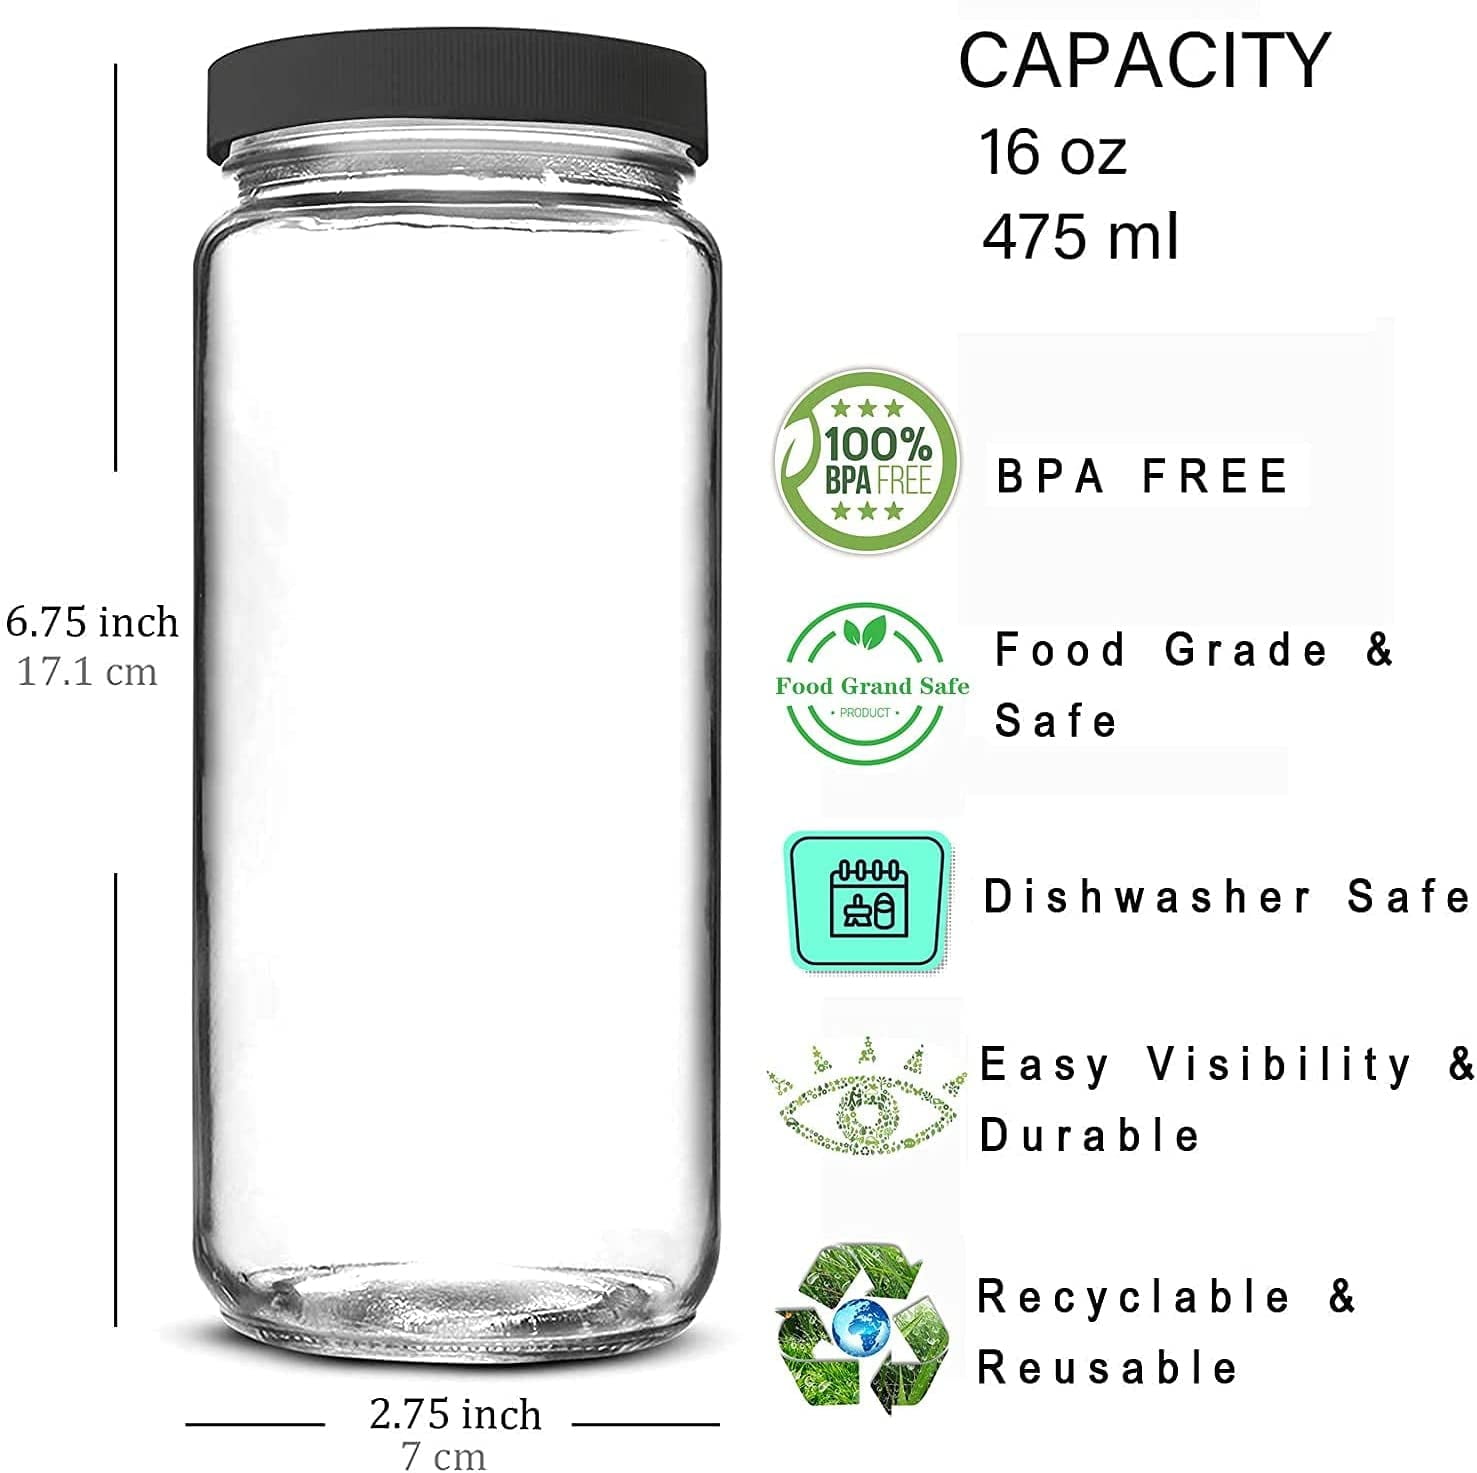 [ 8 Pack ] 16 OZ Glass Juicing Bottles w Airtight Lids & 2 Straws & 2 Lids  w Hole - Reusable Drinking Jars, Travel Water Cups - Tall Mason Jar for